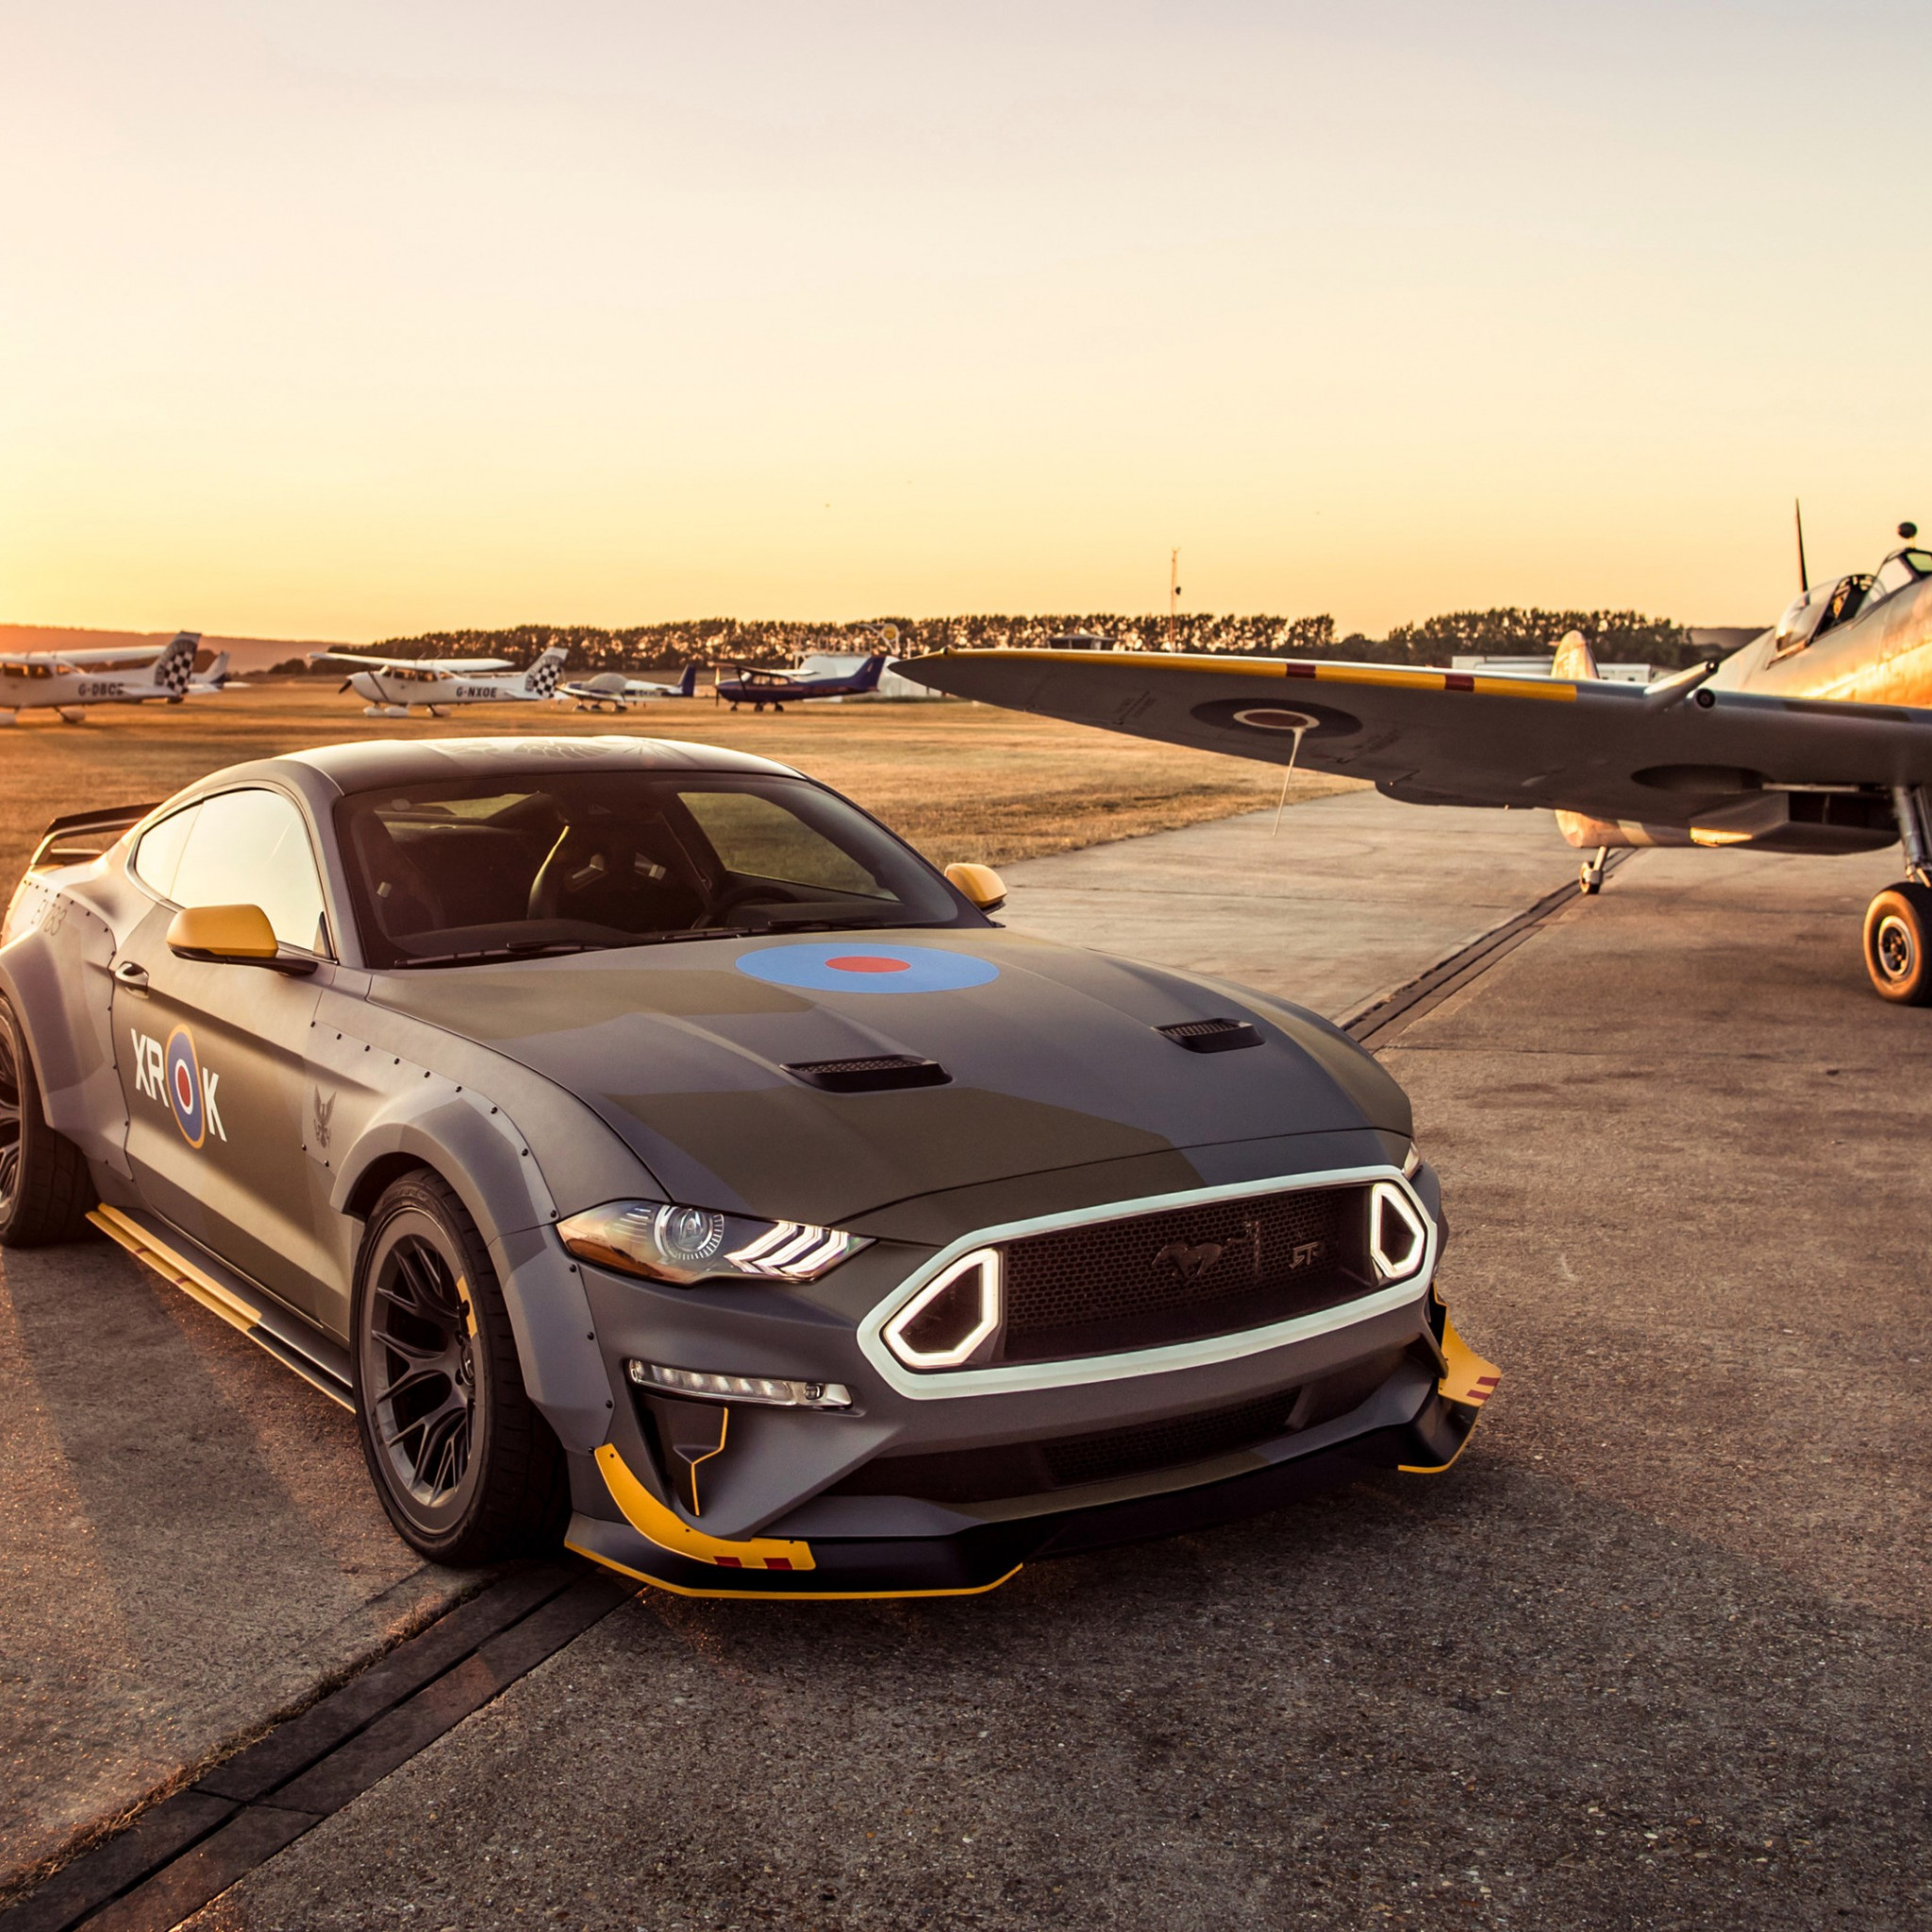 Ford Eagle Squadron Mustang GT wallpaper 2048x2048